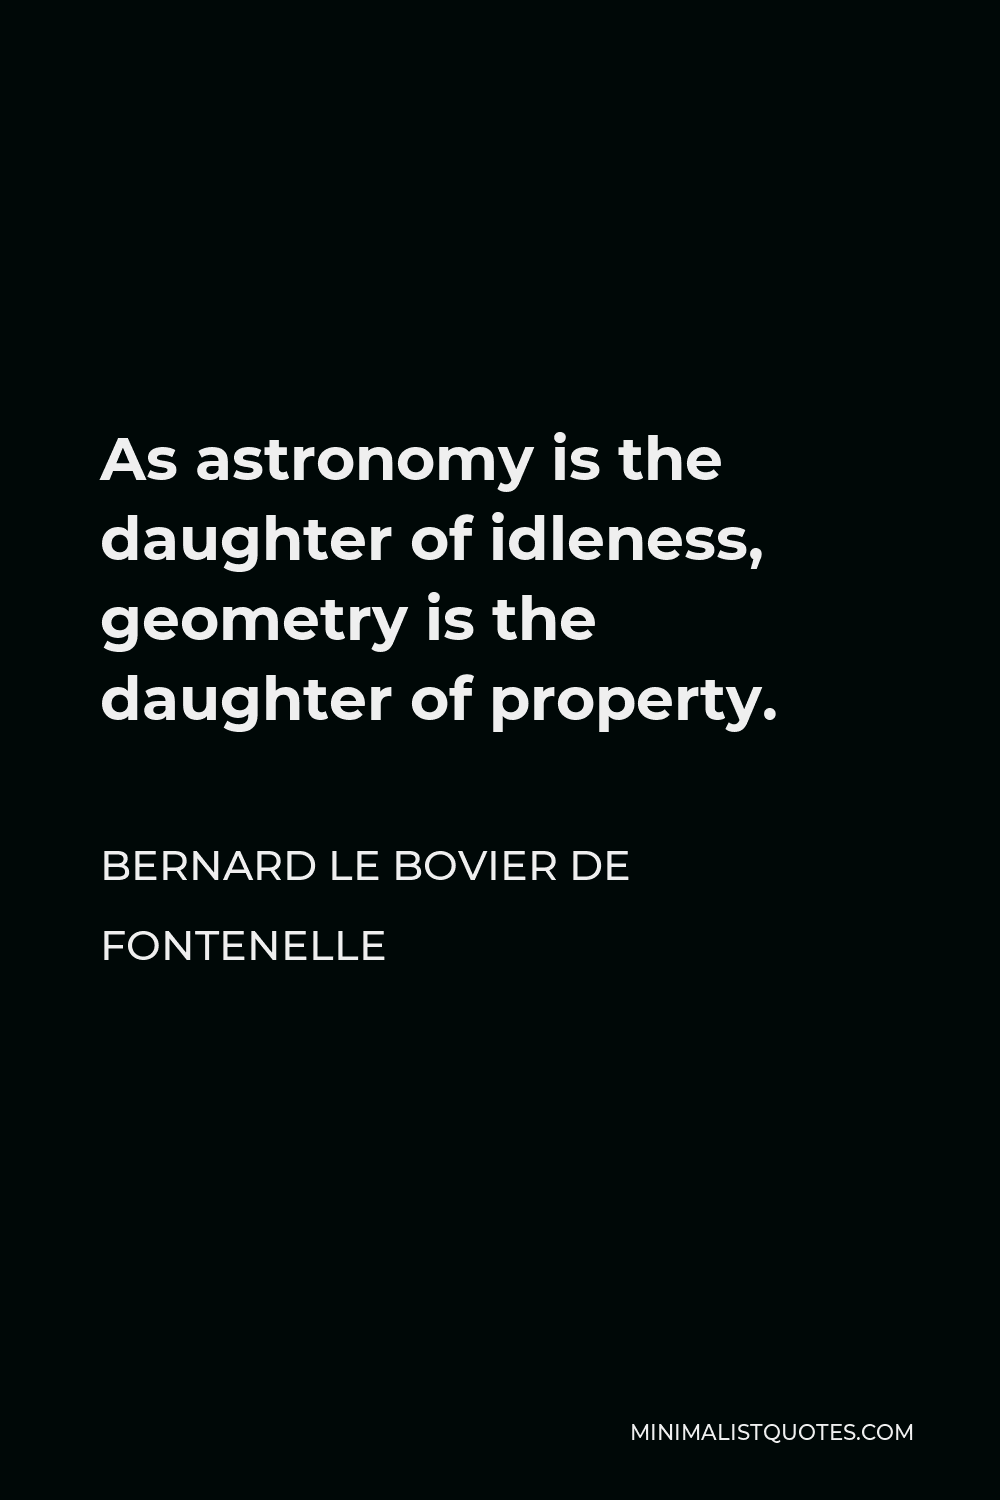 Bernard le Bovier de Fontenelle Quote - As astronomy is the daughter of idleness, geometry is the daughter of property.